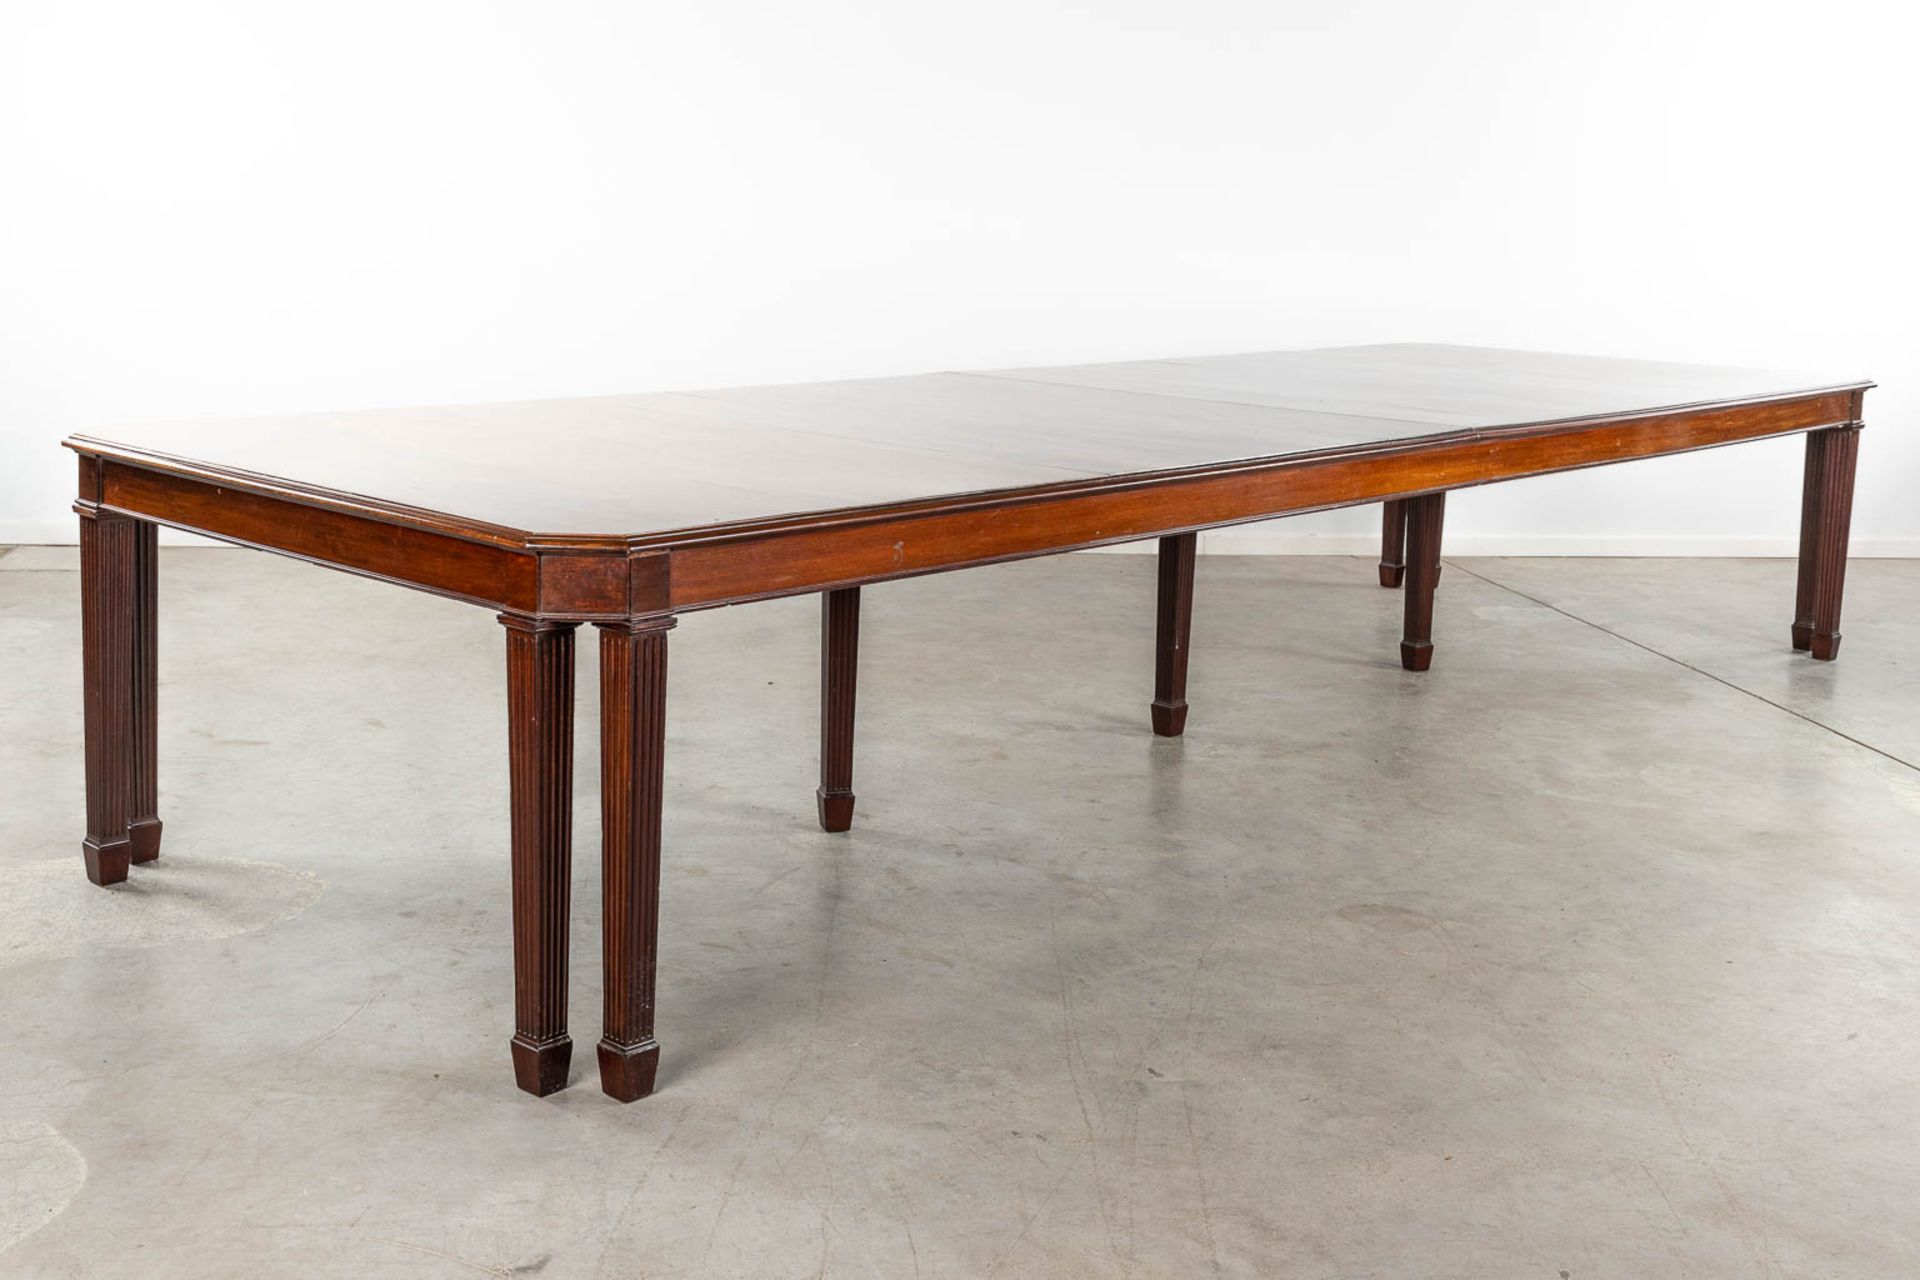 An exceptionally large English conference room table, mahogany. 19th C. (D:147 x W:455 x H:78 cm) - Image 3 of 10